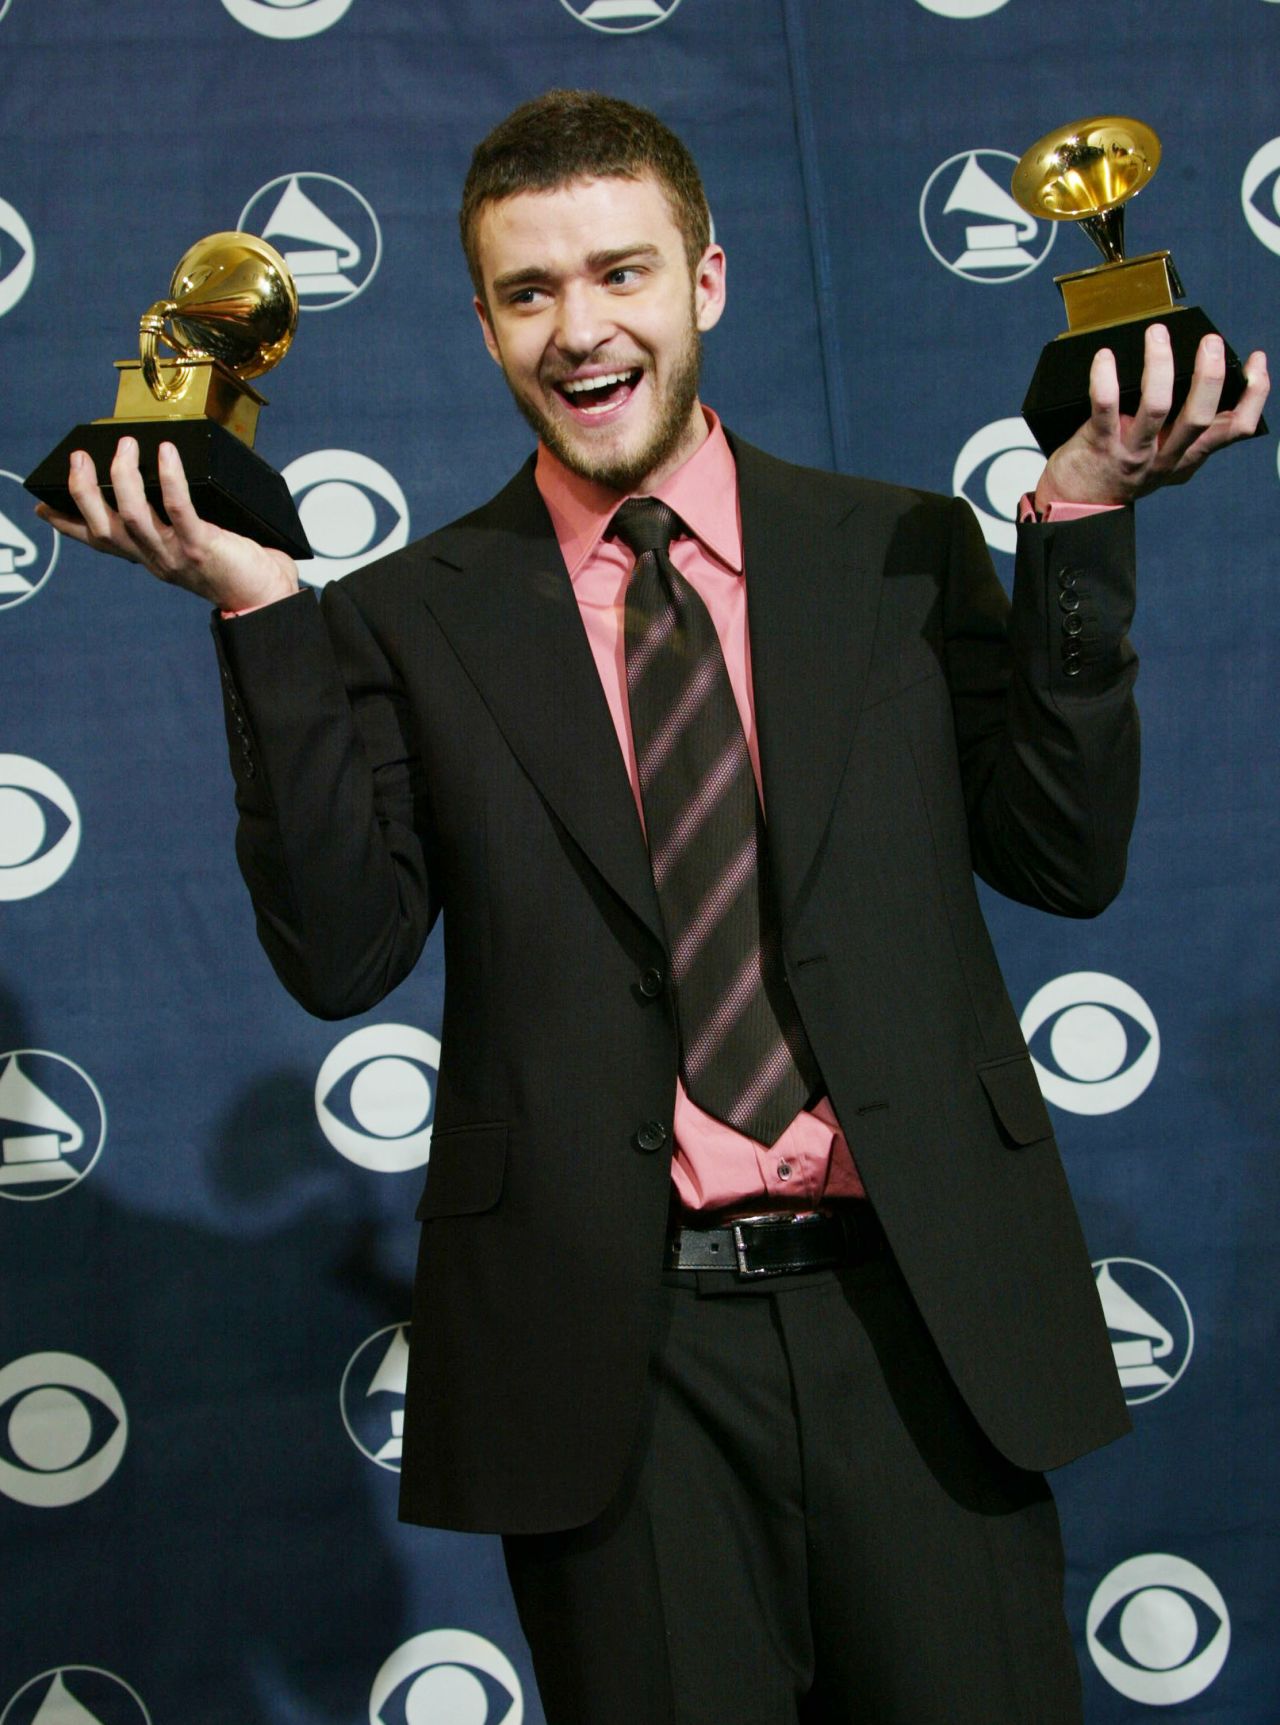 At the 2004 Grammy Awards, Timberlake won best male pop vocal performance and best pop vocal album for his solo debut "Justified." Among the hit songs on the album: "Rock Your Body," "Cry Me a River" and "Like I Love You."